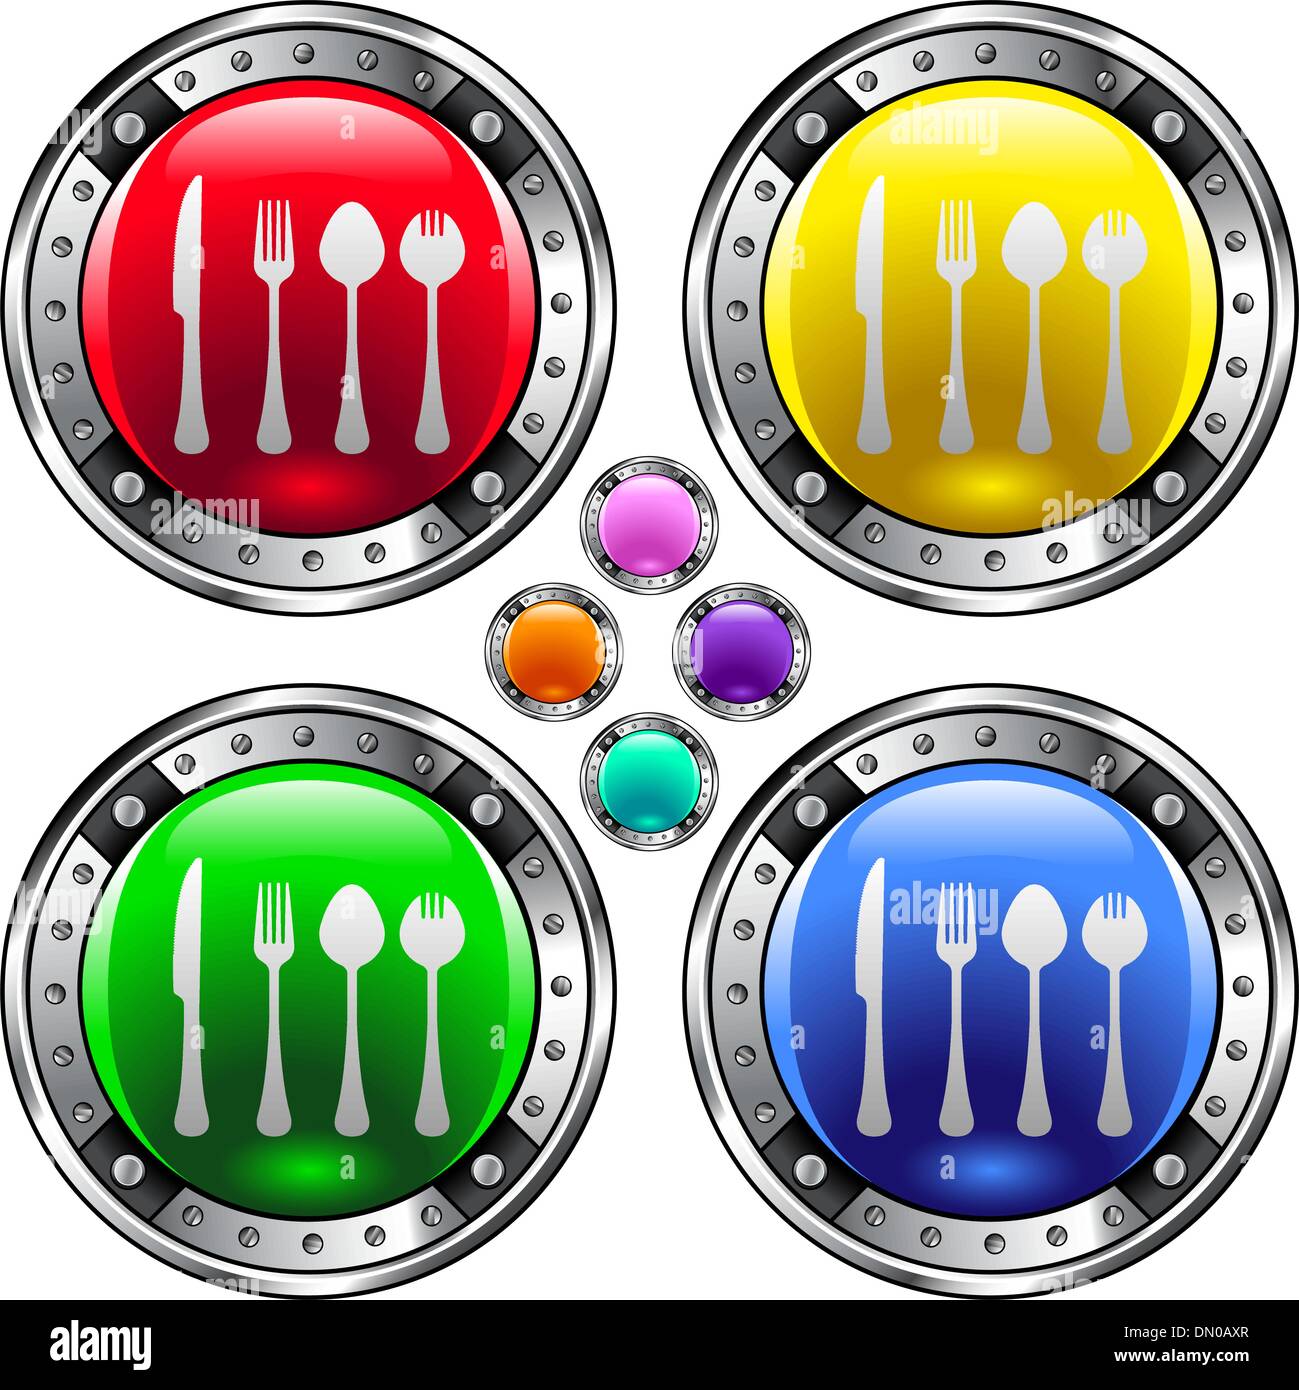 Eating utensils colorful button Stock Vector